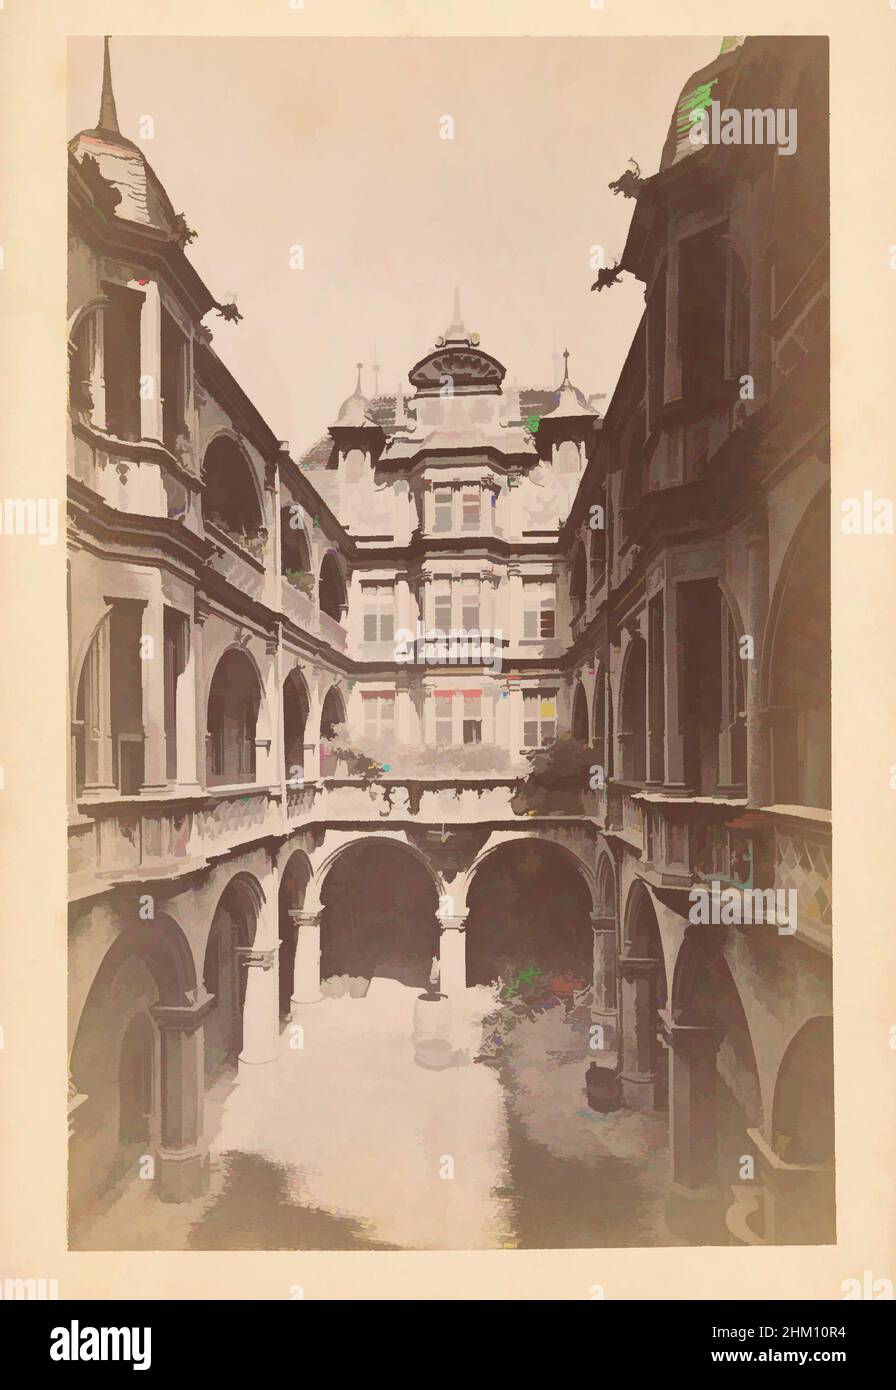 Art inspired by Courtyard of the Pellerhaus in Nuremberg, Hof im Peller'schen Hause, Nuremberg, publisher: Friedrich Bruckmann, Neurenberg, publisher: München, 1863 - 1898, cardboard, albumen print, height 171 mm × width 113 mm, Classic works modernized by Artotop with a splash of modernity. Shapes, color and value, eye-catching visual impact on art. Emotions through freedom of artworks in a contemporary way. A timeless message pursuing a wildly creative new direction. Artists turning to the digital medium and creating the Artotop NFT Stock Photo